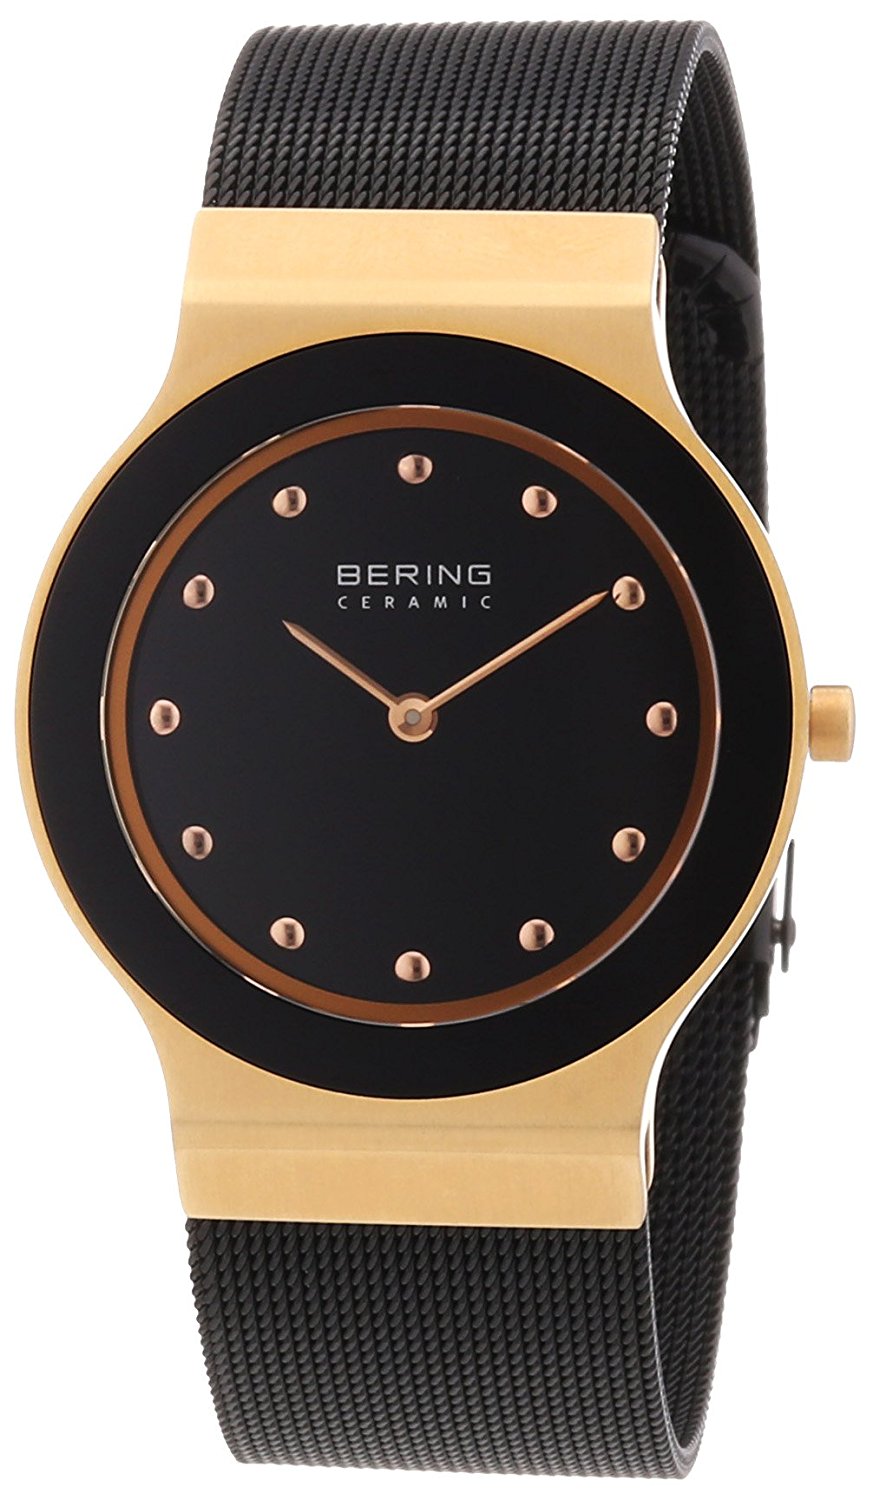 Bering Ceramic Polished Gold Watch